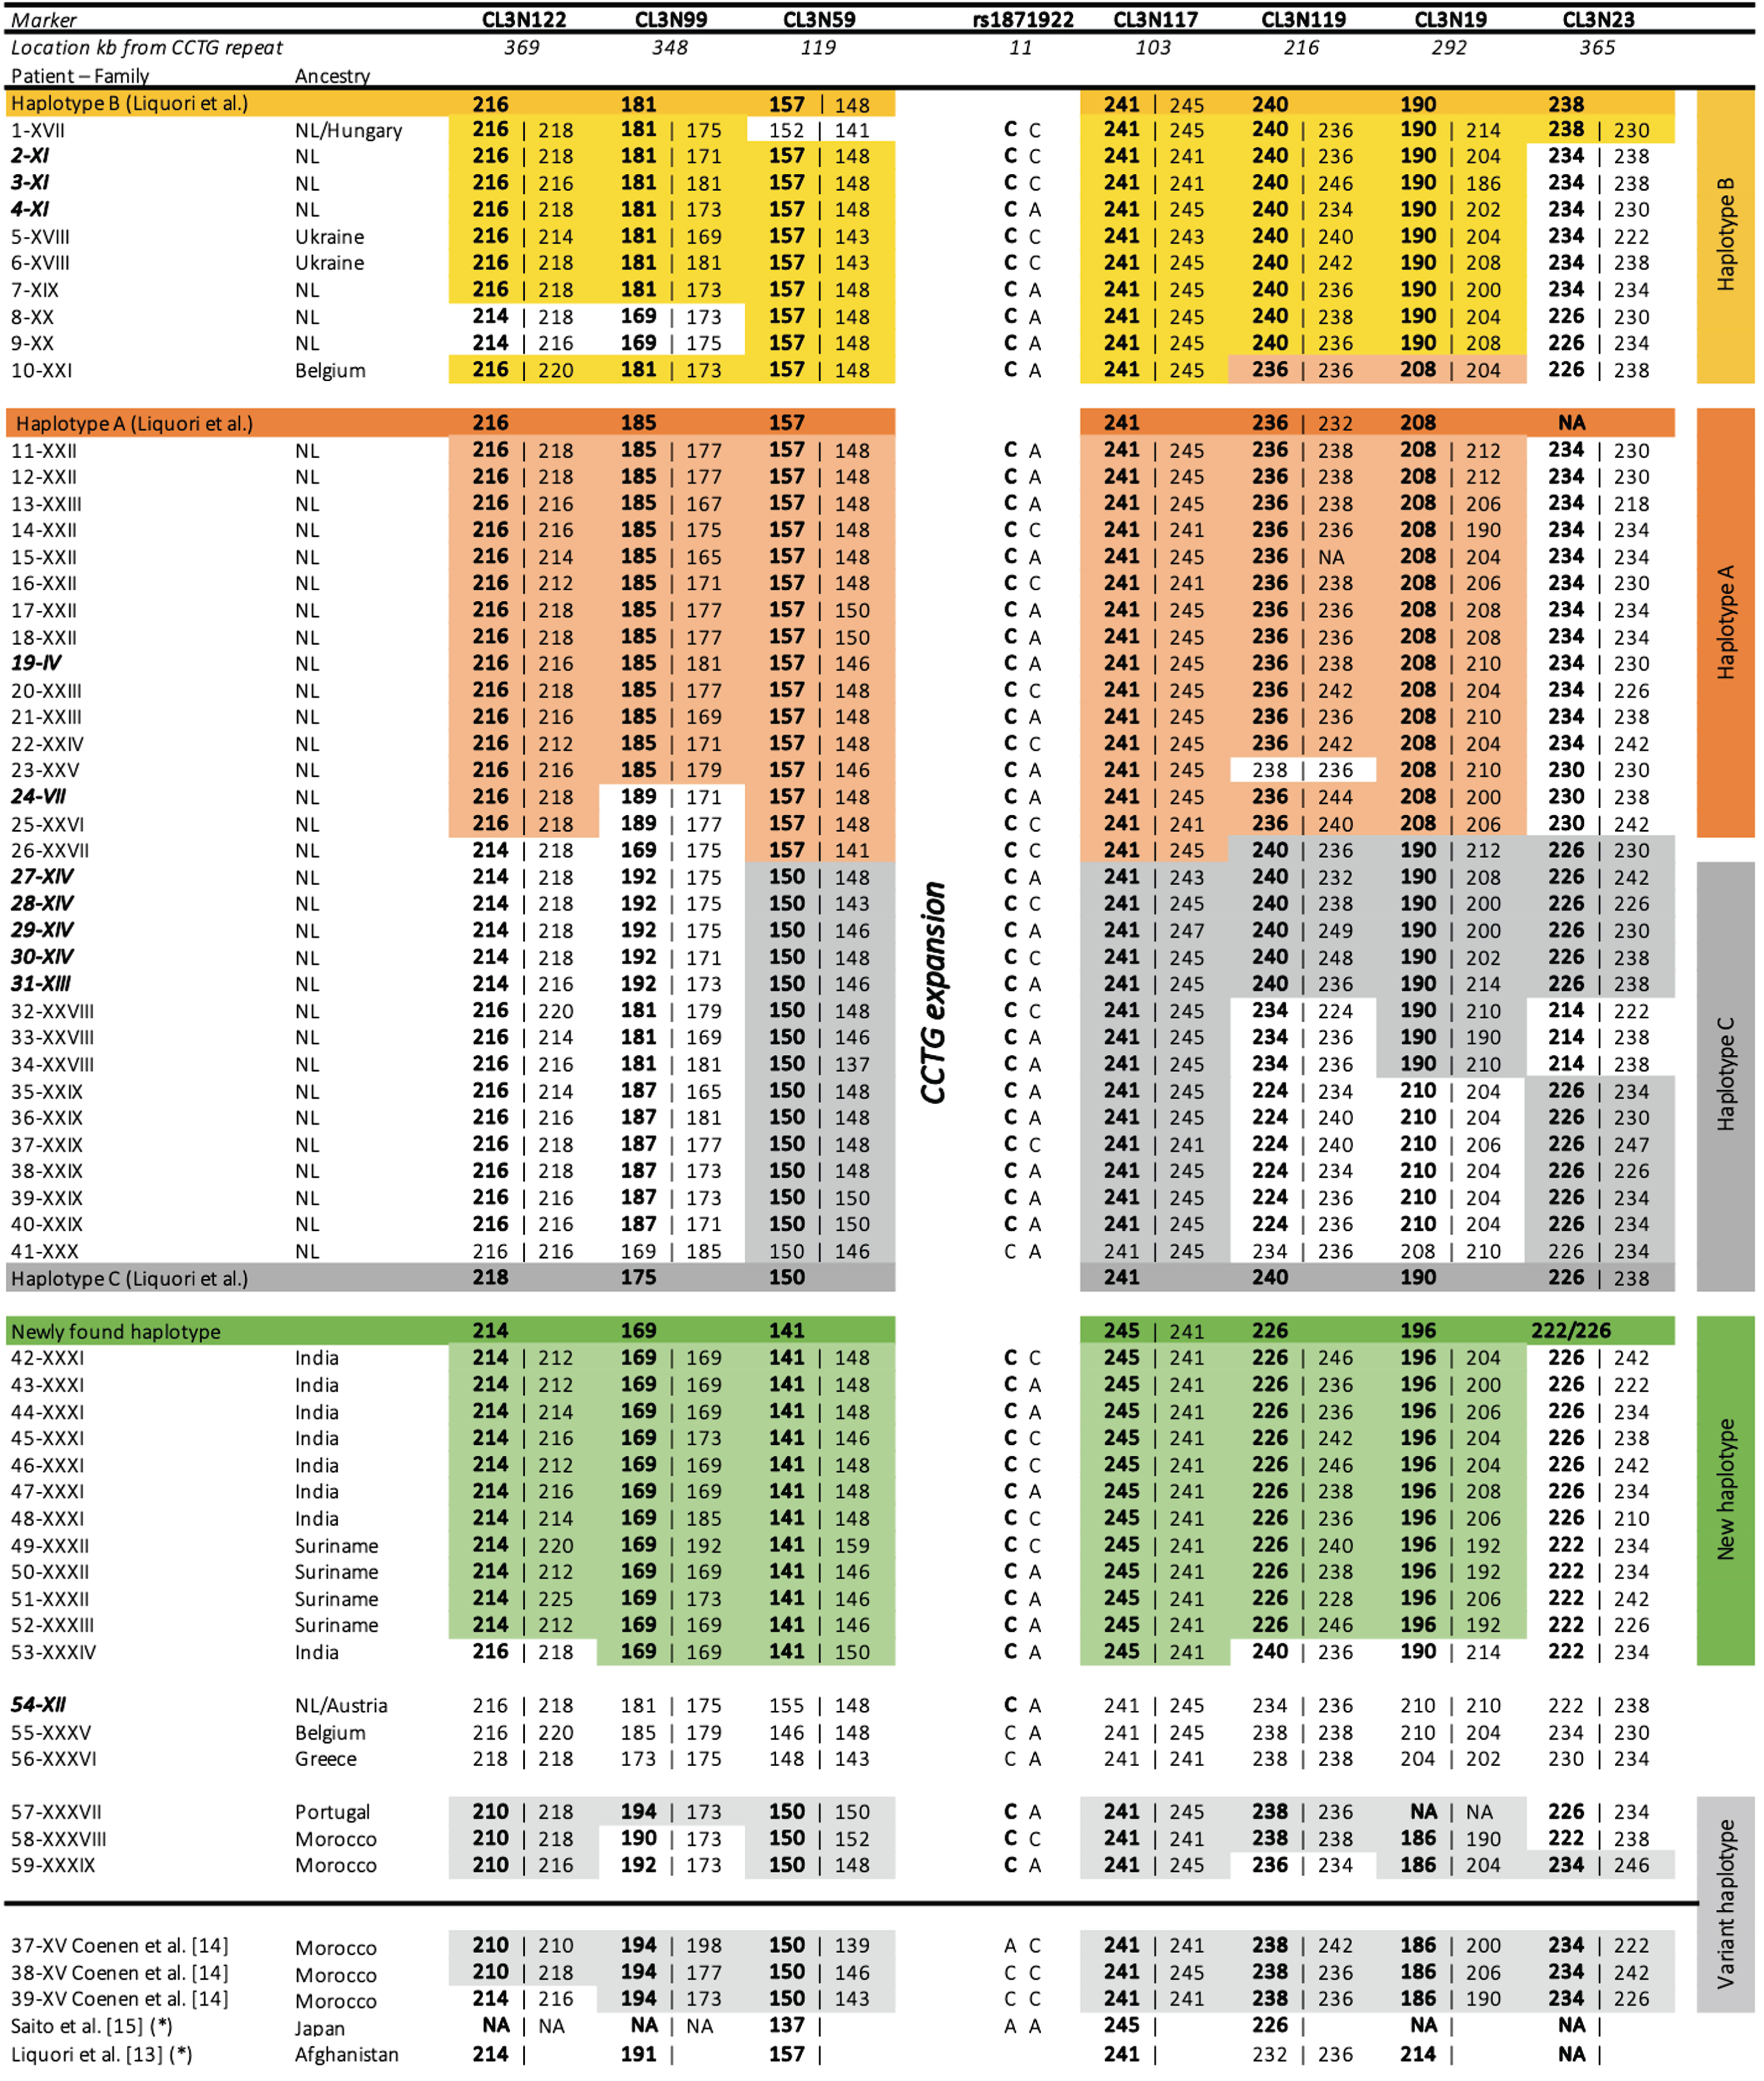 Haplotypes of 59 DM2 patients. (both color and black/white version):NA: not analysed. The length of the analysed markers is expressed in base pairs. Haplotypes are based on earlier reported haplotypes [13–15]. Repeat lengths as reported by Liquori et al. are shown in the first row [13]. The families related to earlier reported patients by Coenen et al. are shown in italic [14]. Patients have been assigned to a haplotype based on the observed repeat lengths. The repeat lengths of the disease-linked alleles are shown in bold. For some individual patients, it was not possible to determine this with certainty. Genotypes shared among the different haplotypes are shaded. * Recalculated reported marker lengths of previous studies to make them comparable to our lengths.